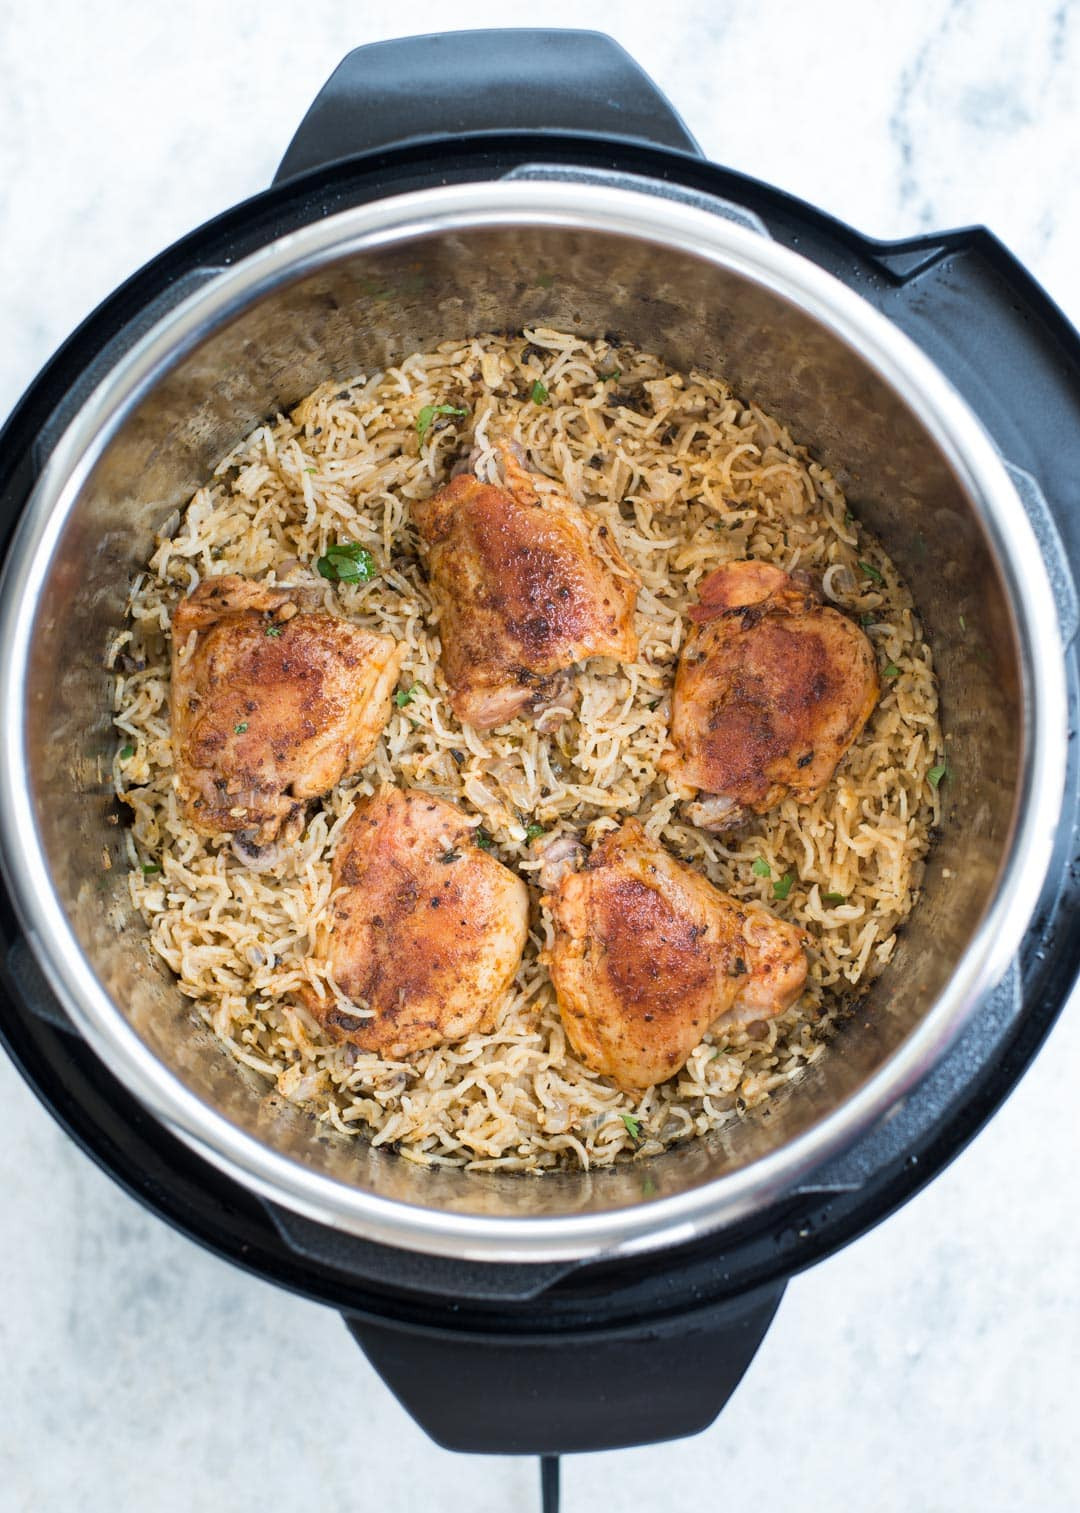 Chicken And Rice Instant Pot Recipes
 INSTANT POT GARLIC HERB CHICKEN AND RICE